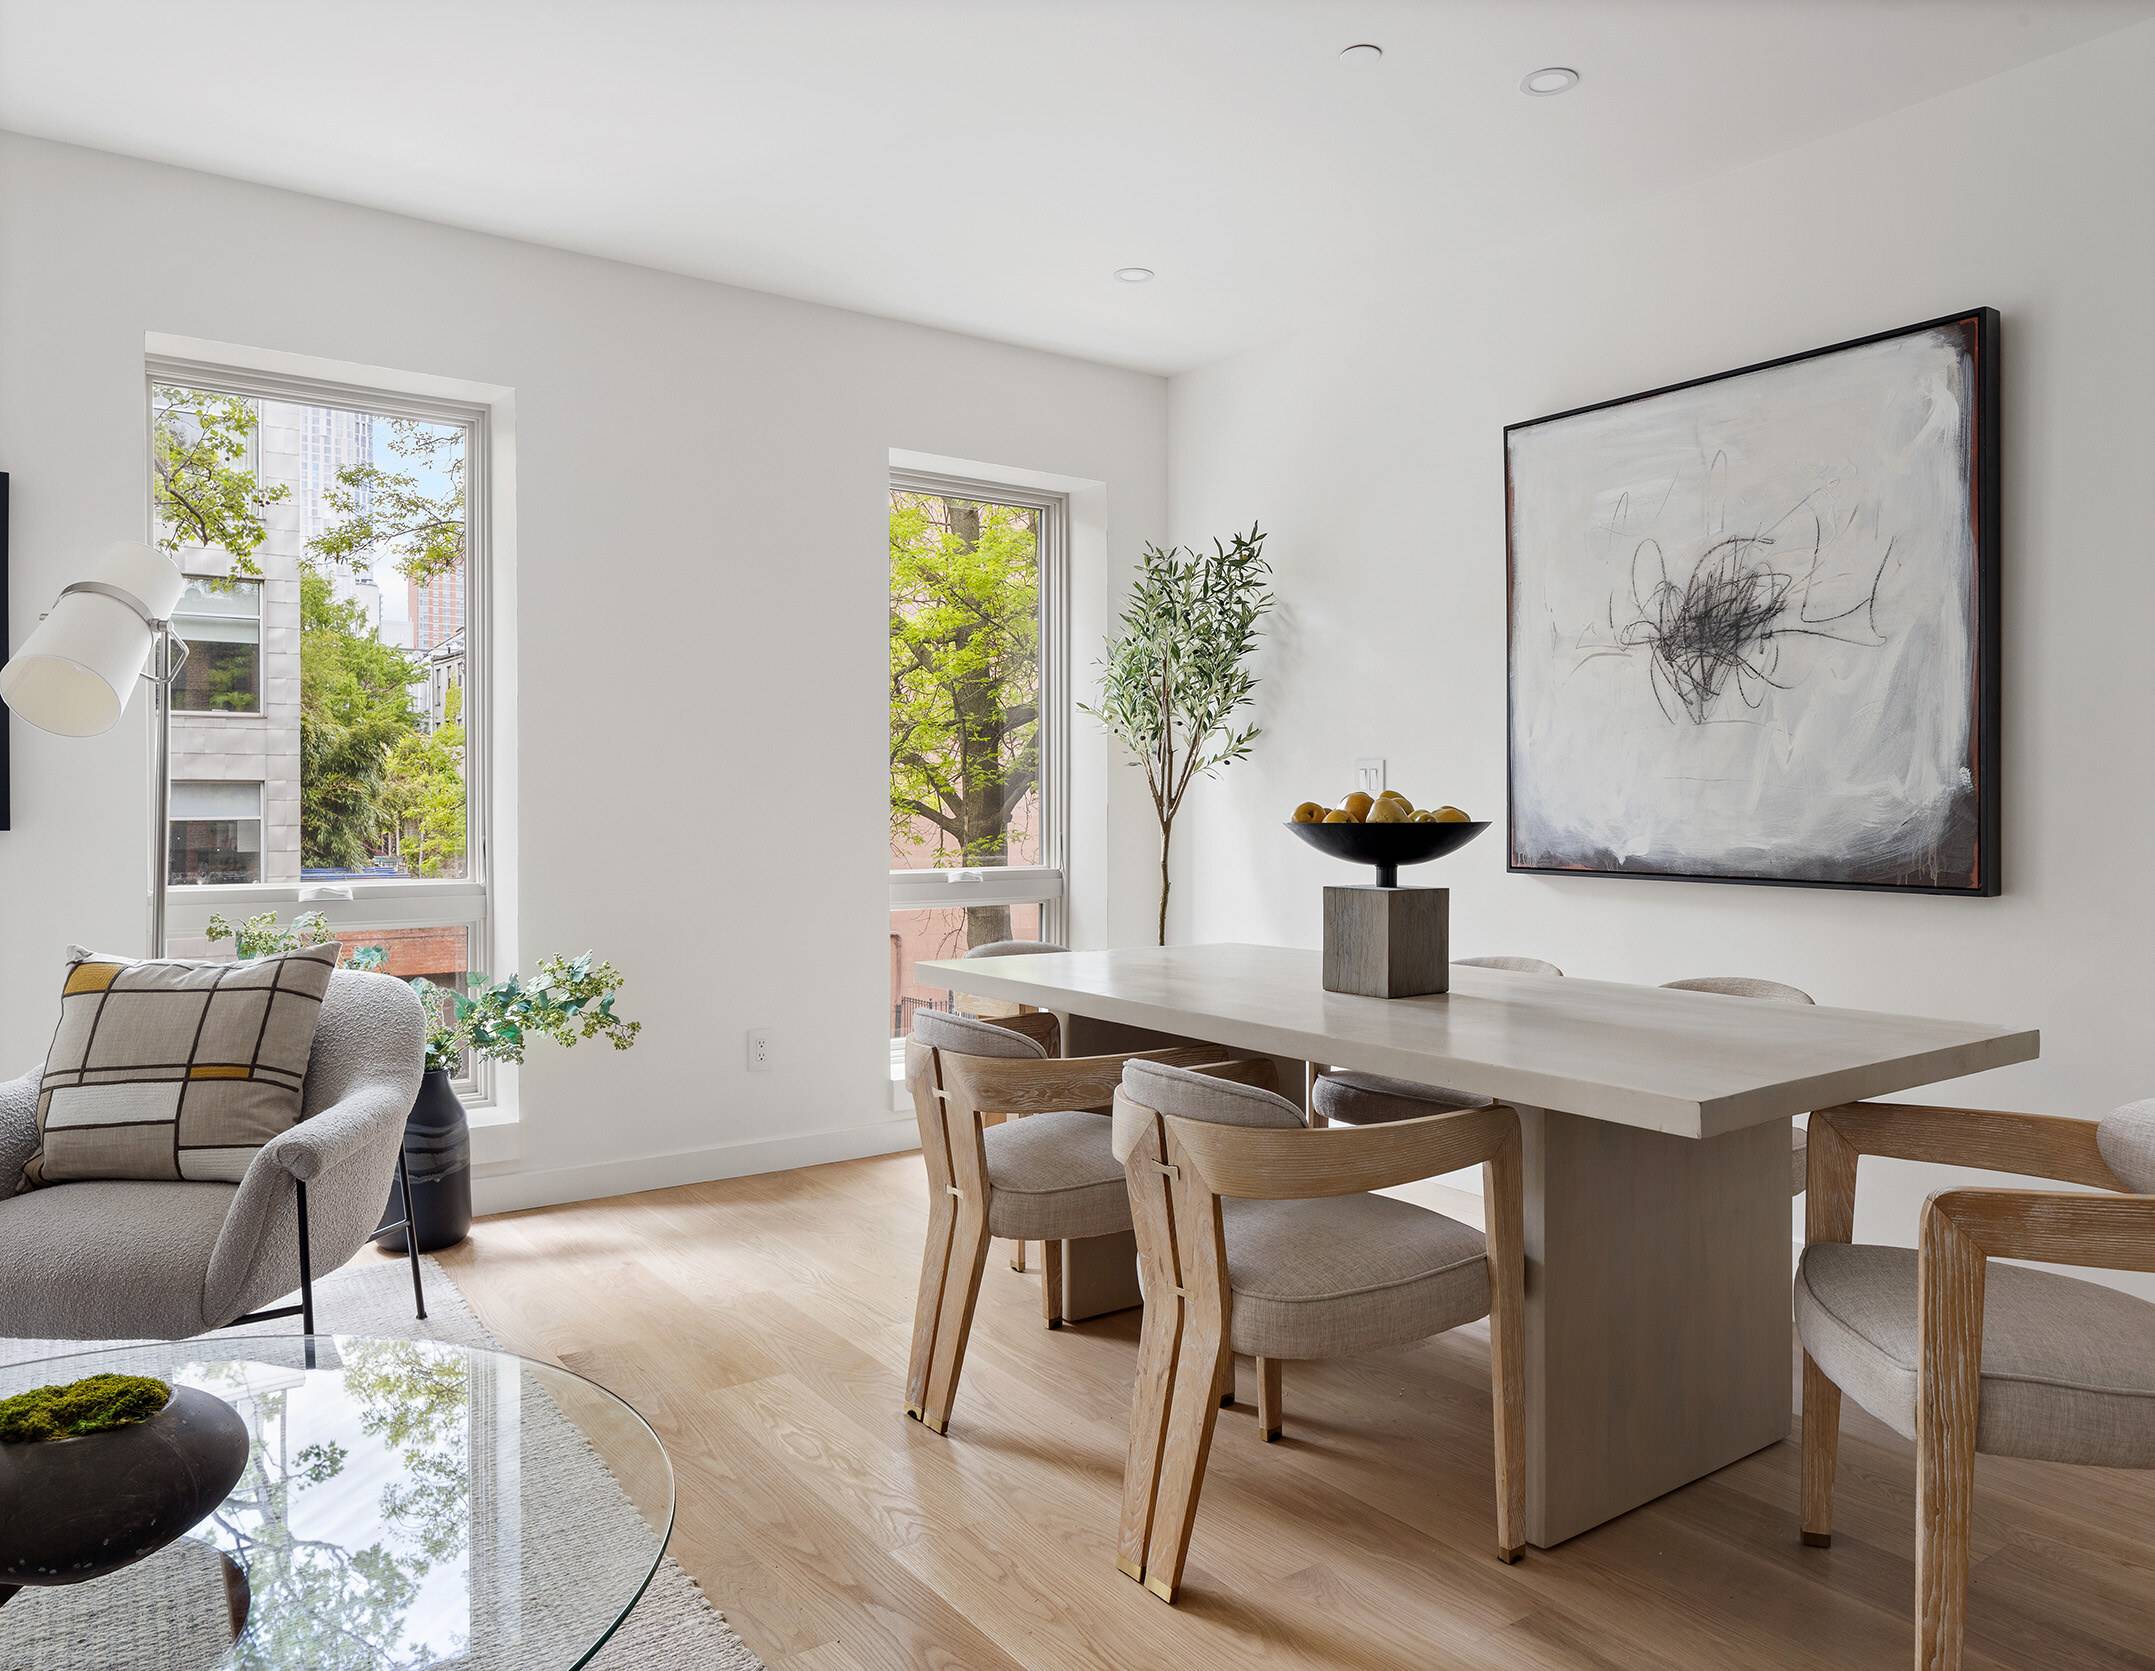 Indulge in the epitome of luxury at 124 Wyckoff Street, a brand new 3 unit boutique condominium on a picturesque block on the border of Boerum Hill and Cobble Hill.